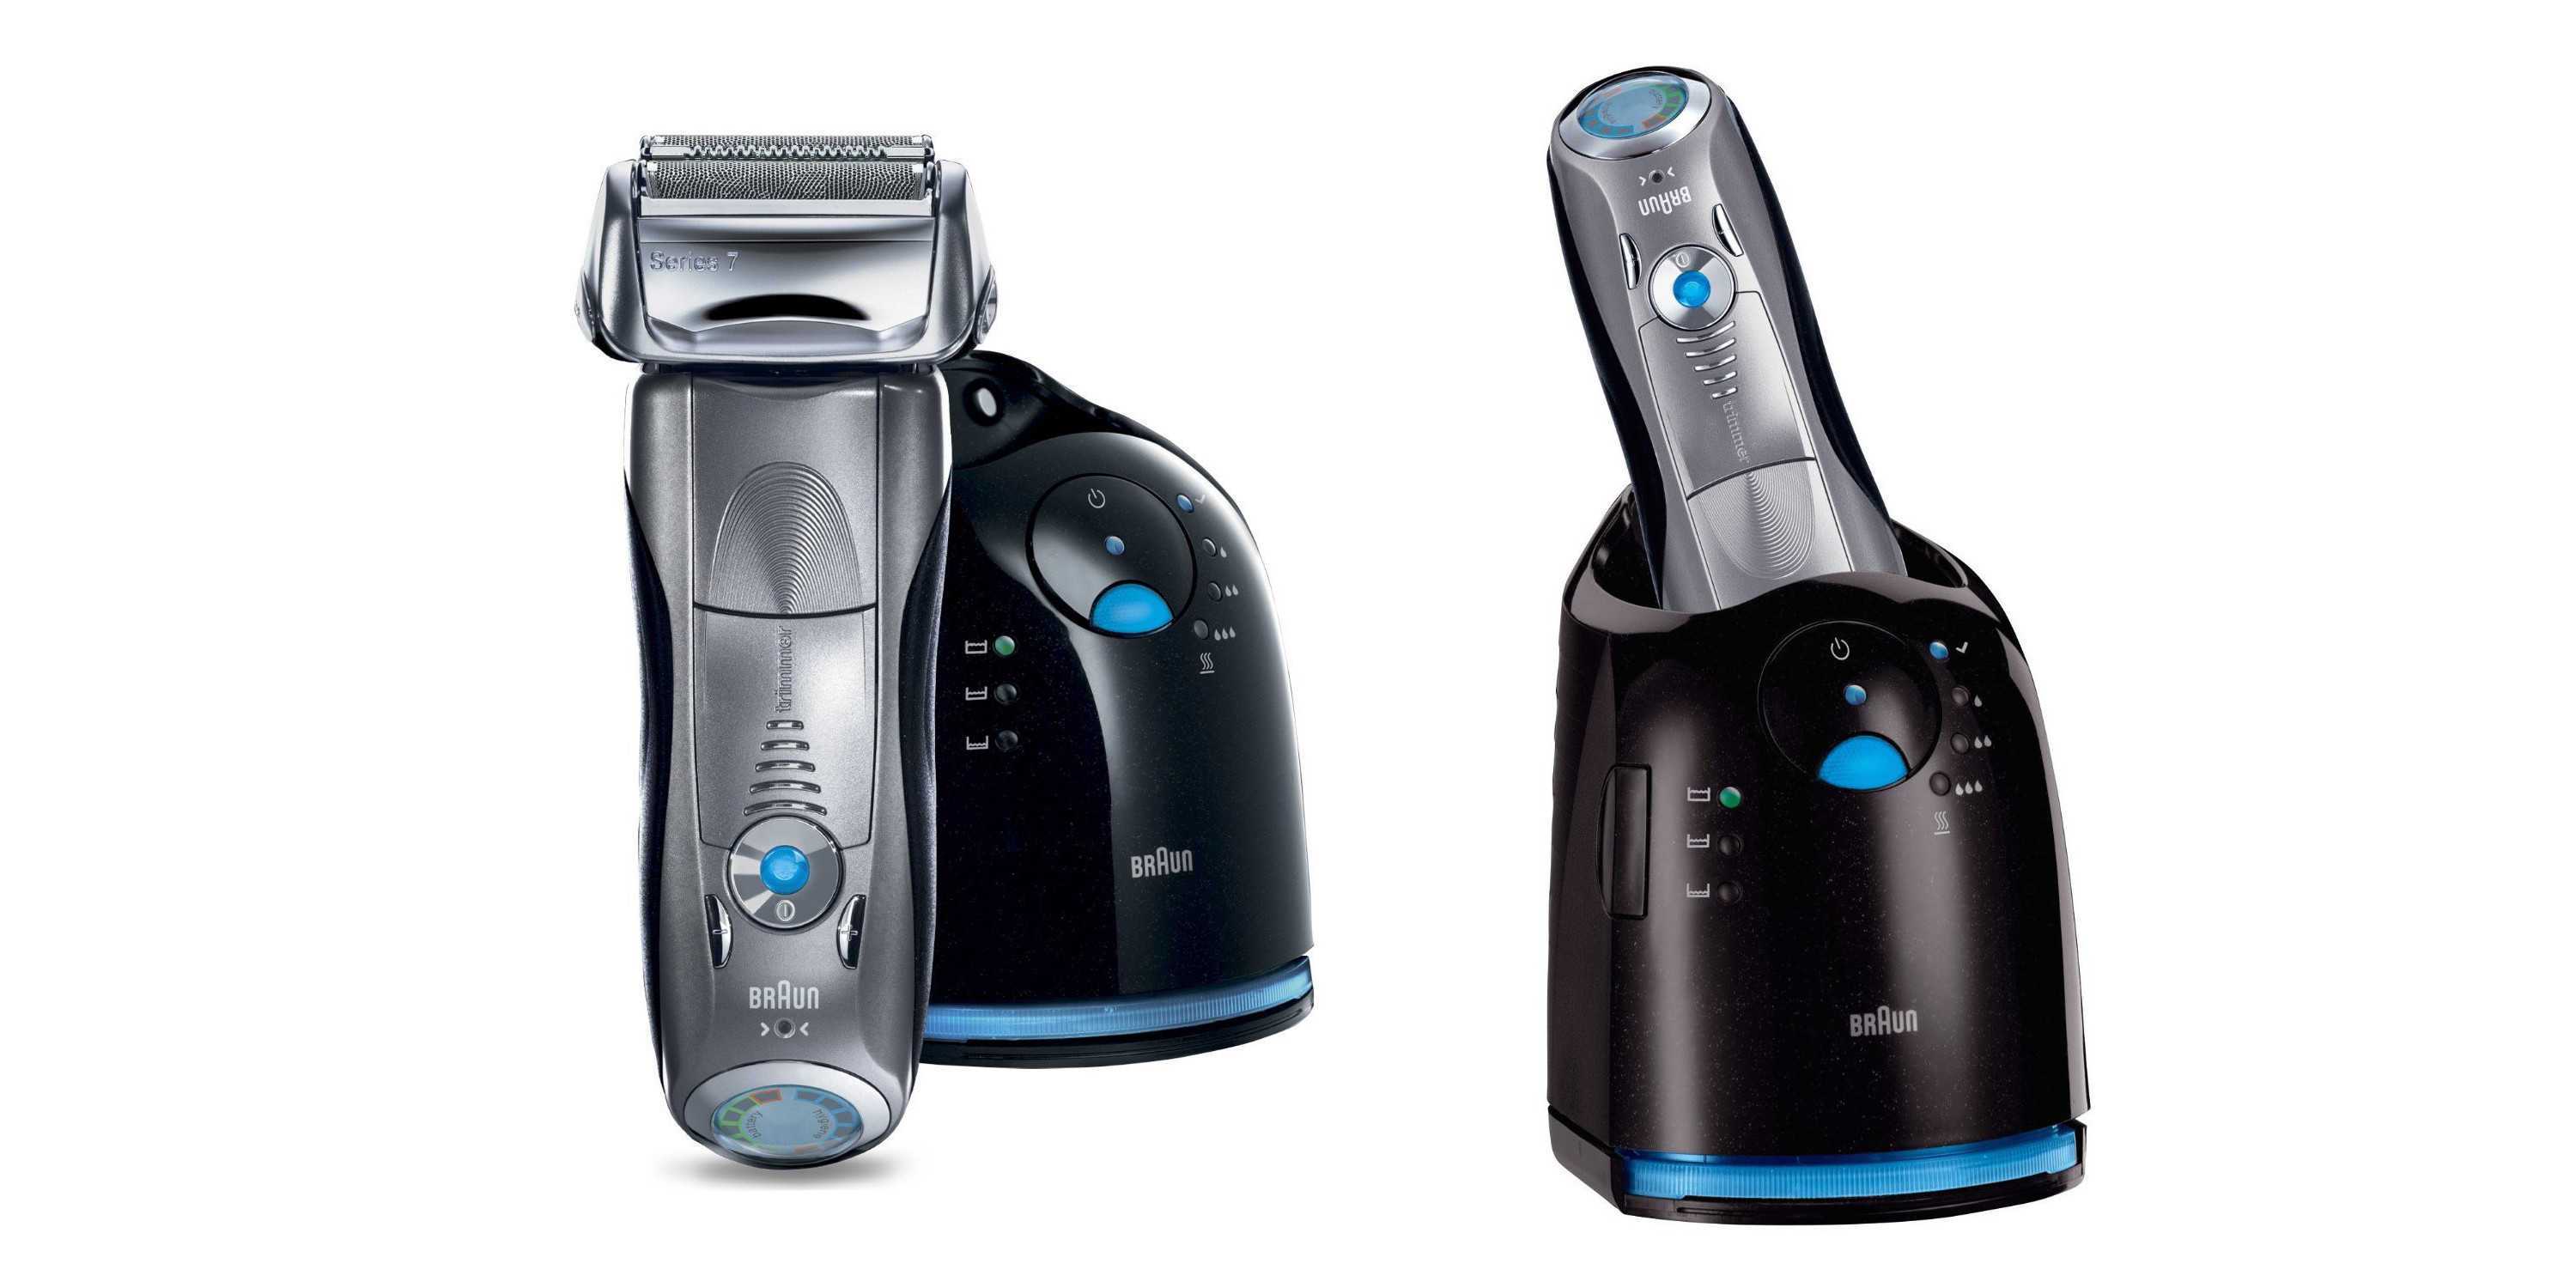 Braun series 7 differences and model comparison: which one to buy? • shavercheck